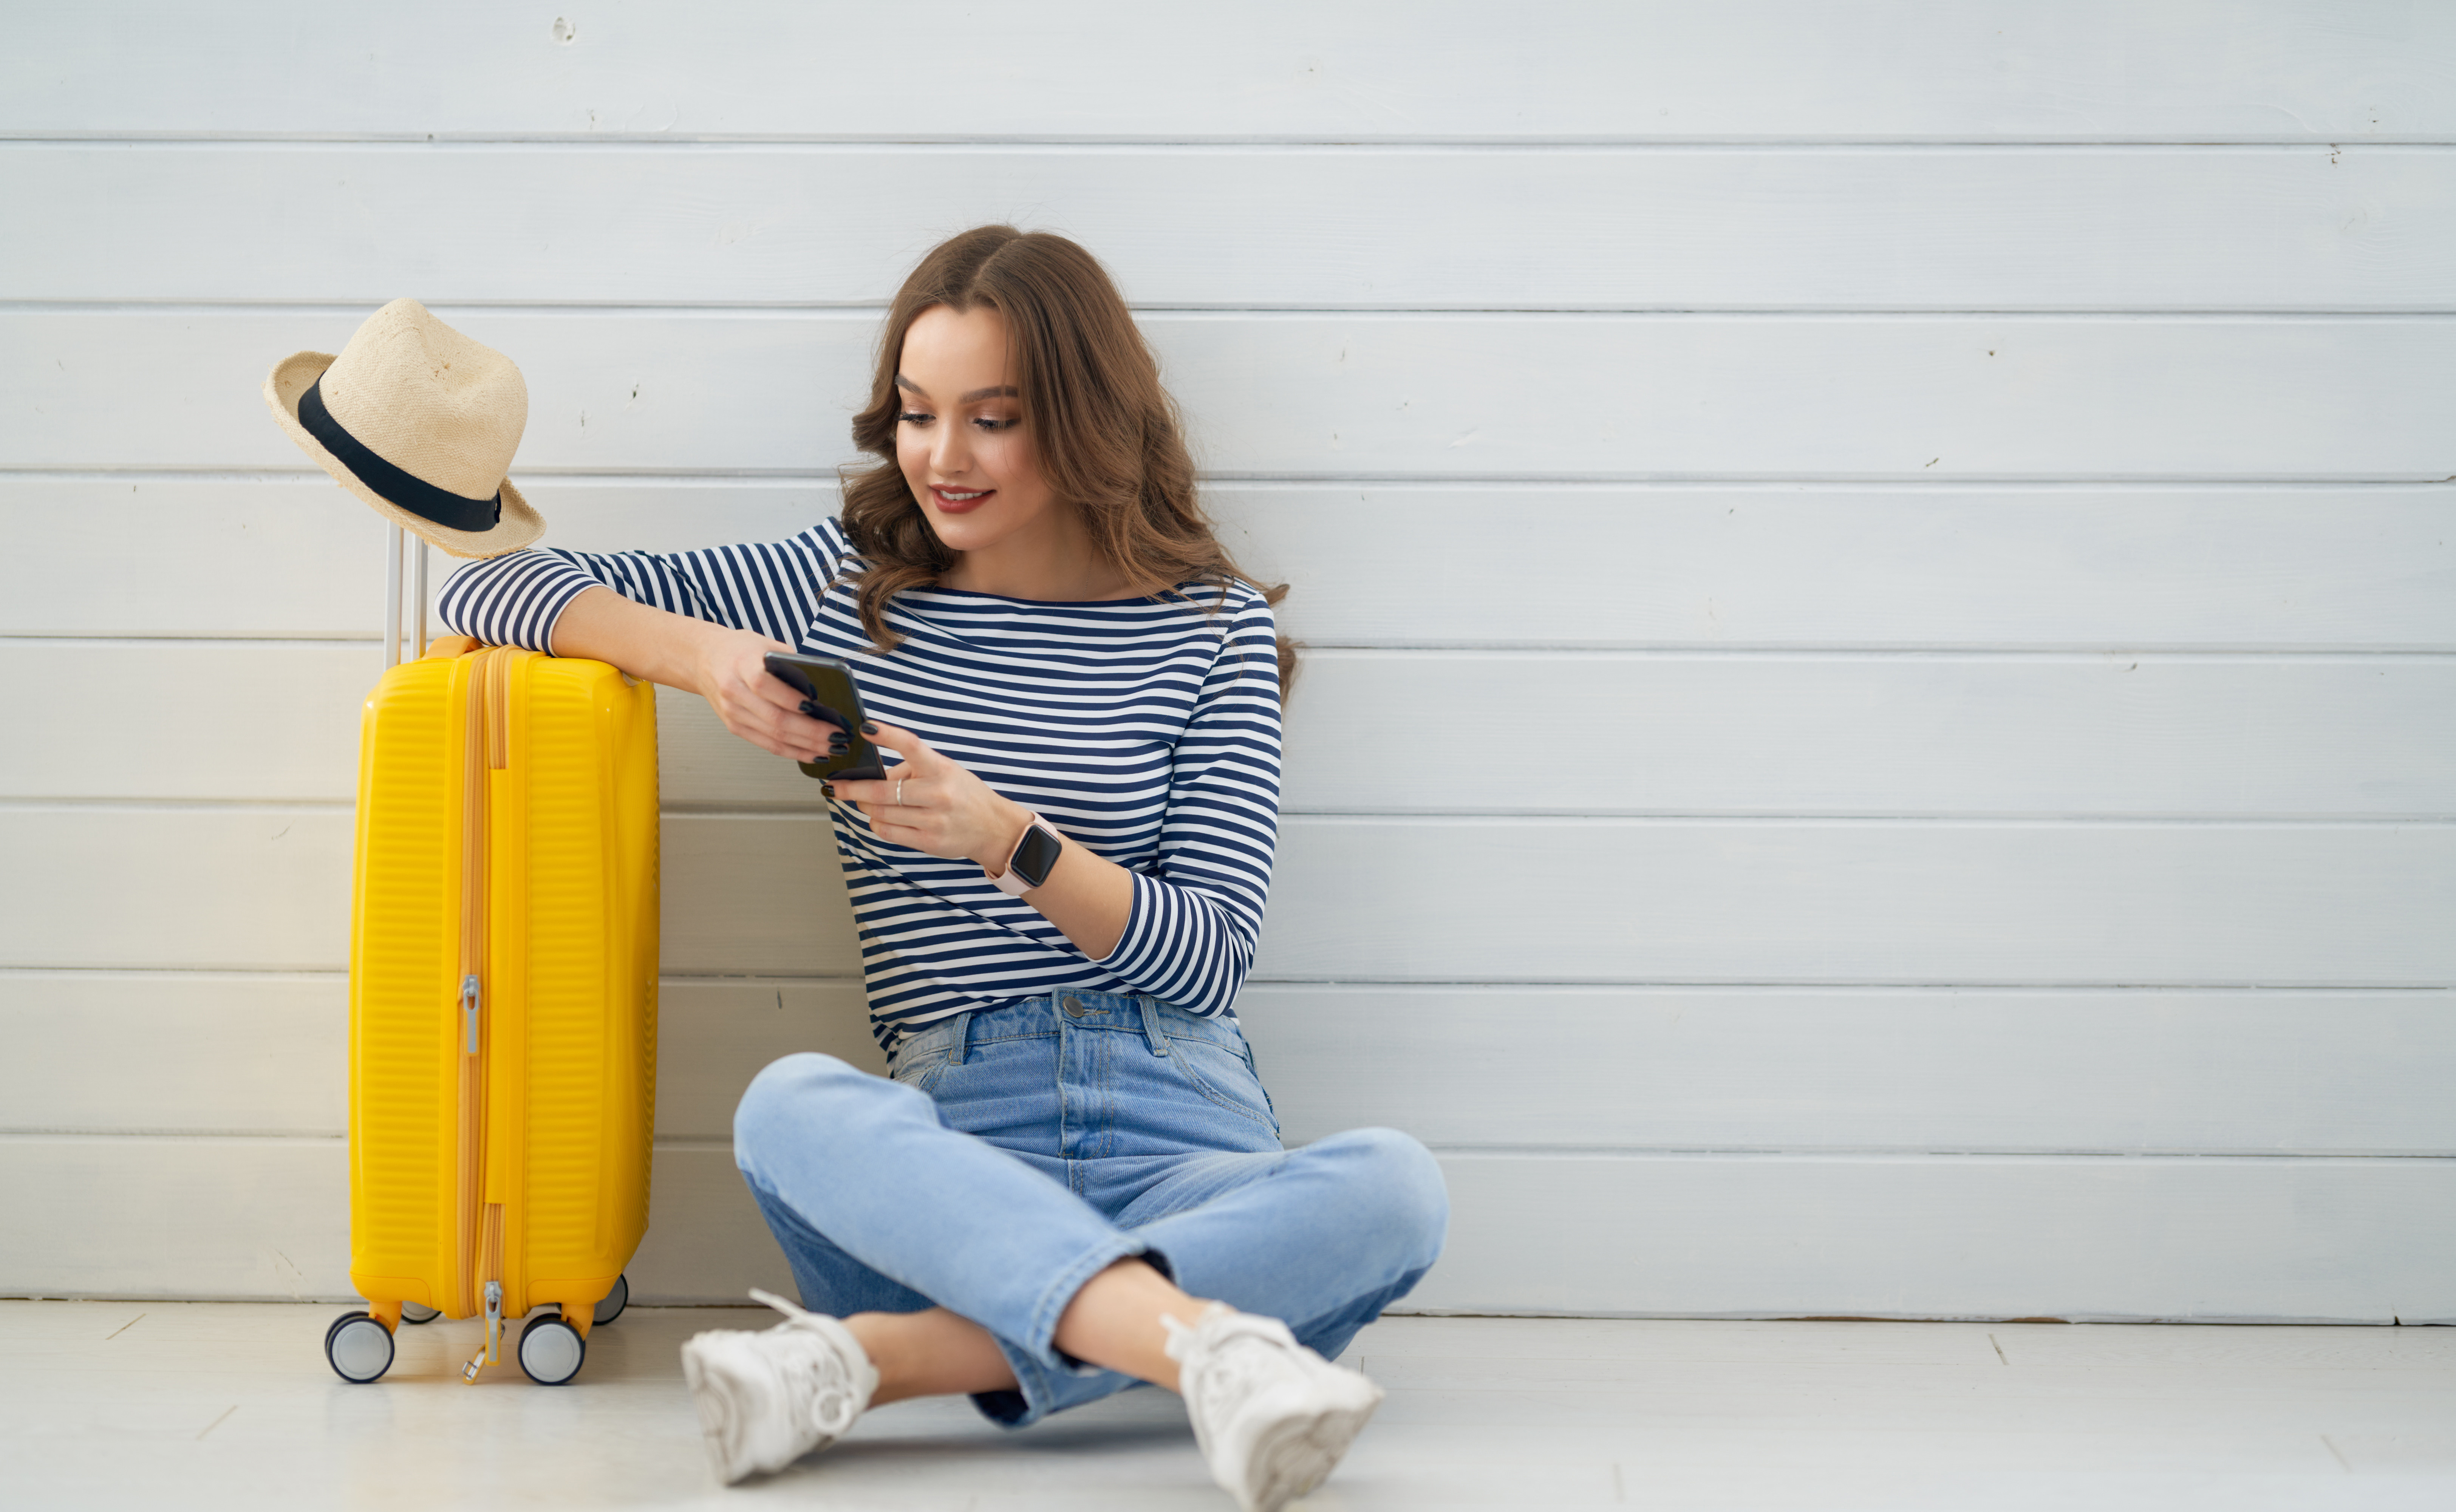 Luggage insurance - Woman with a blue striped sweater and jeans sits on the floor and uses her smartphone next to a yellow suitcase.